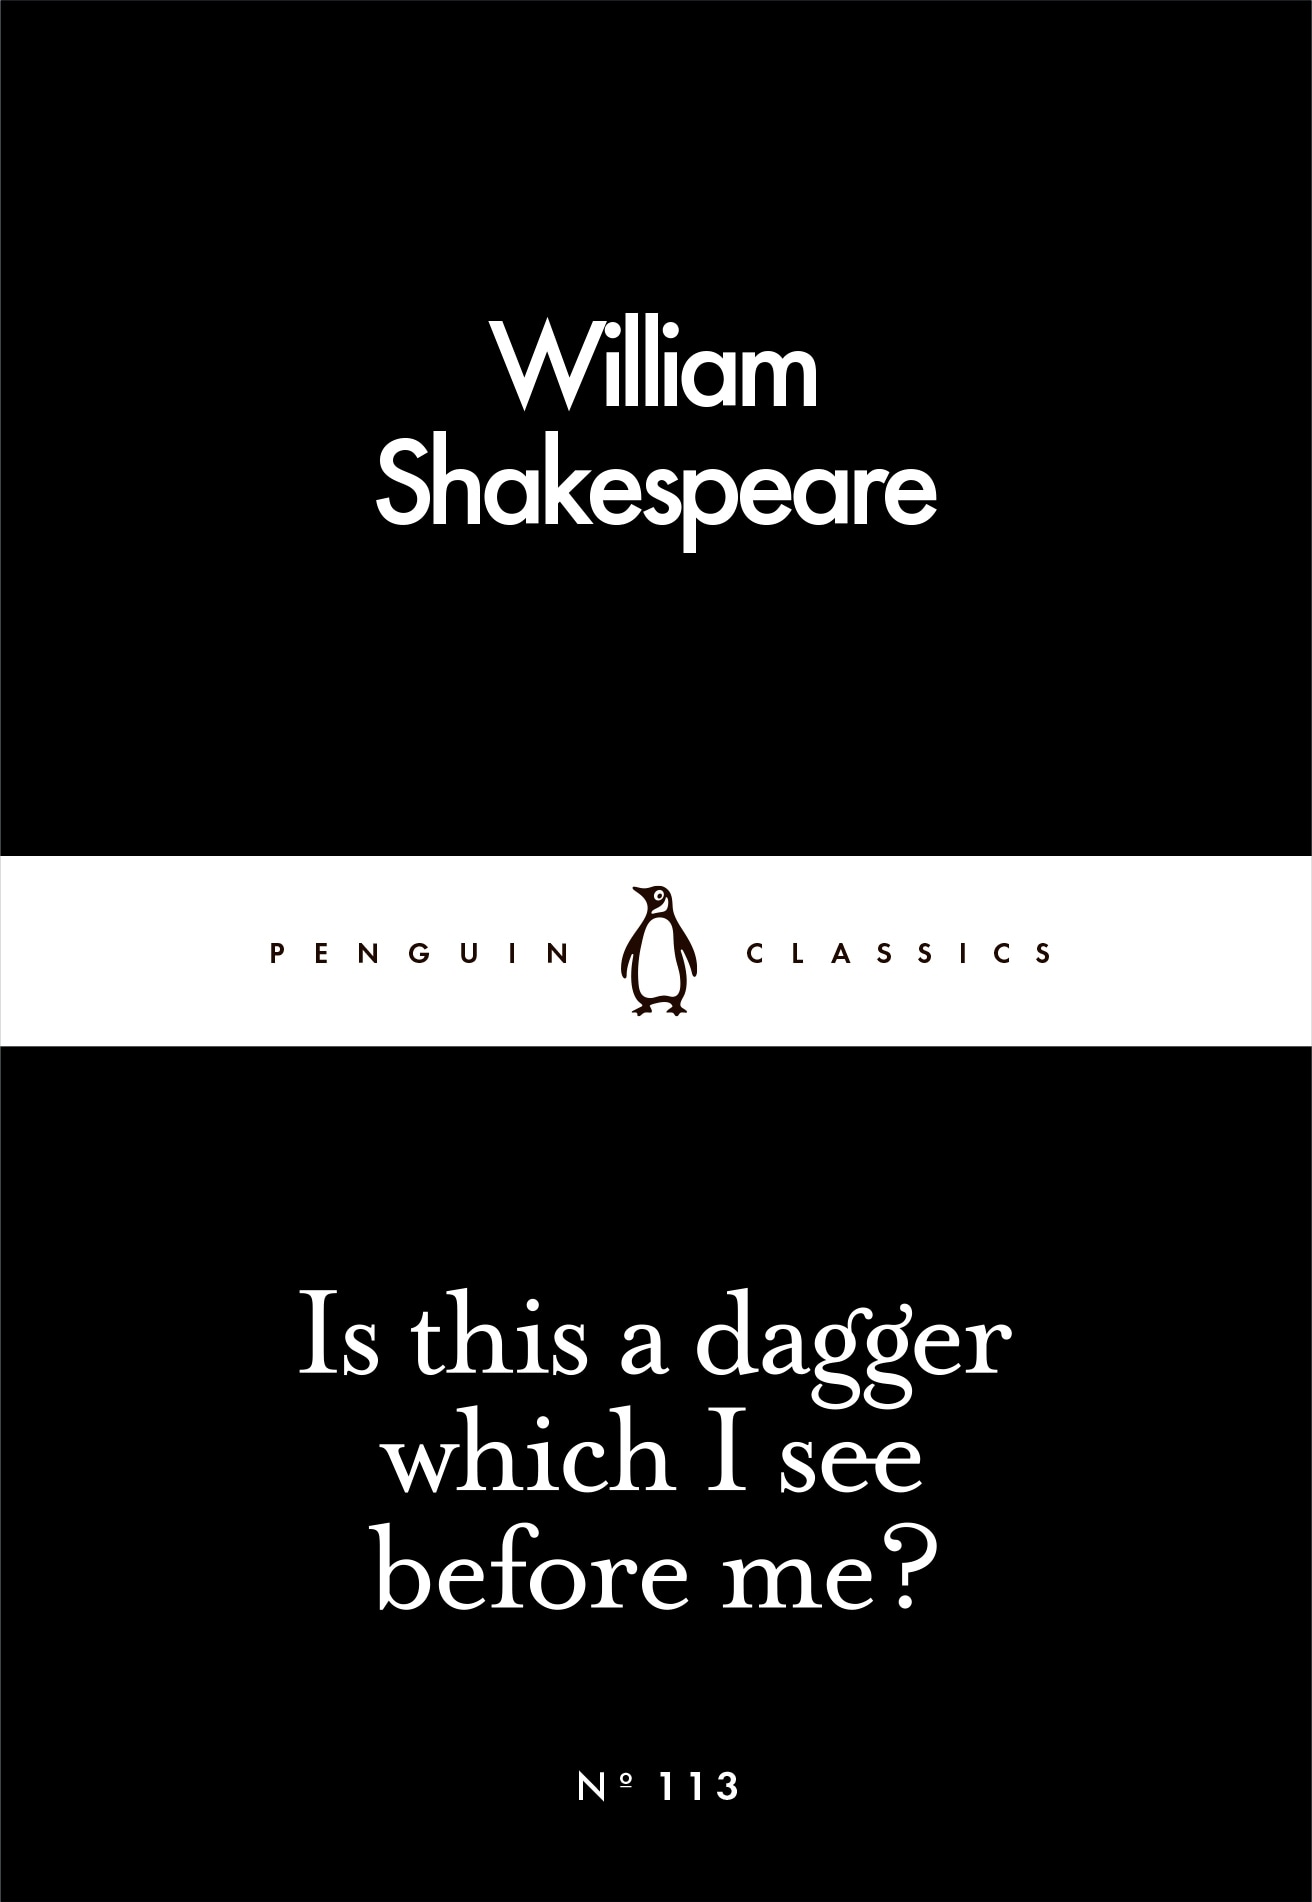 Book “Is This a Dagger Which I See Before Me?” by William Shakespeare — March 3, 2016